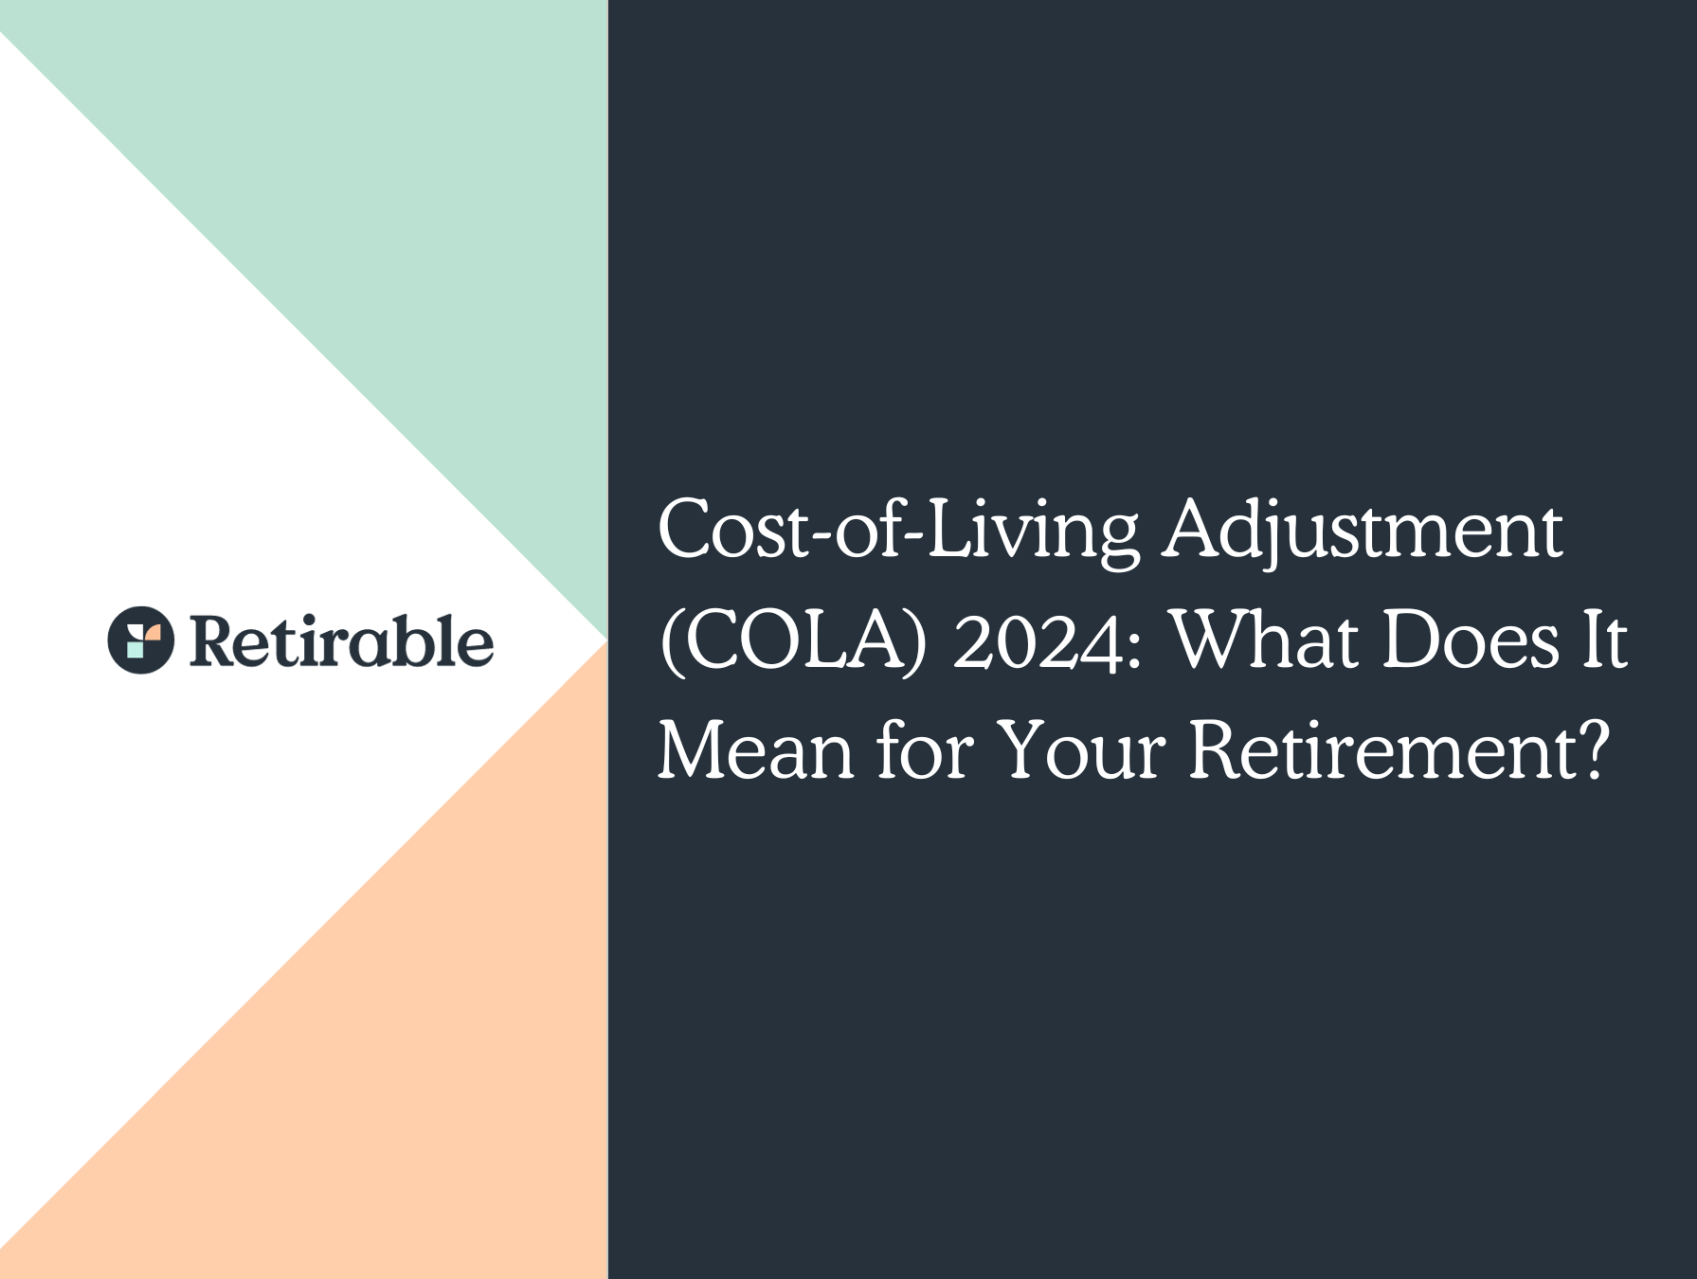 Cost-of-Living Adjustment (COLA) 2024: What Does It Mean for Your Retirement?